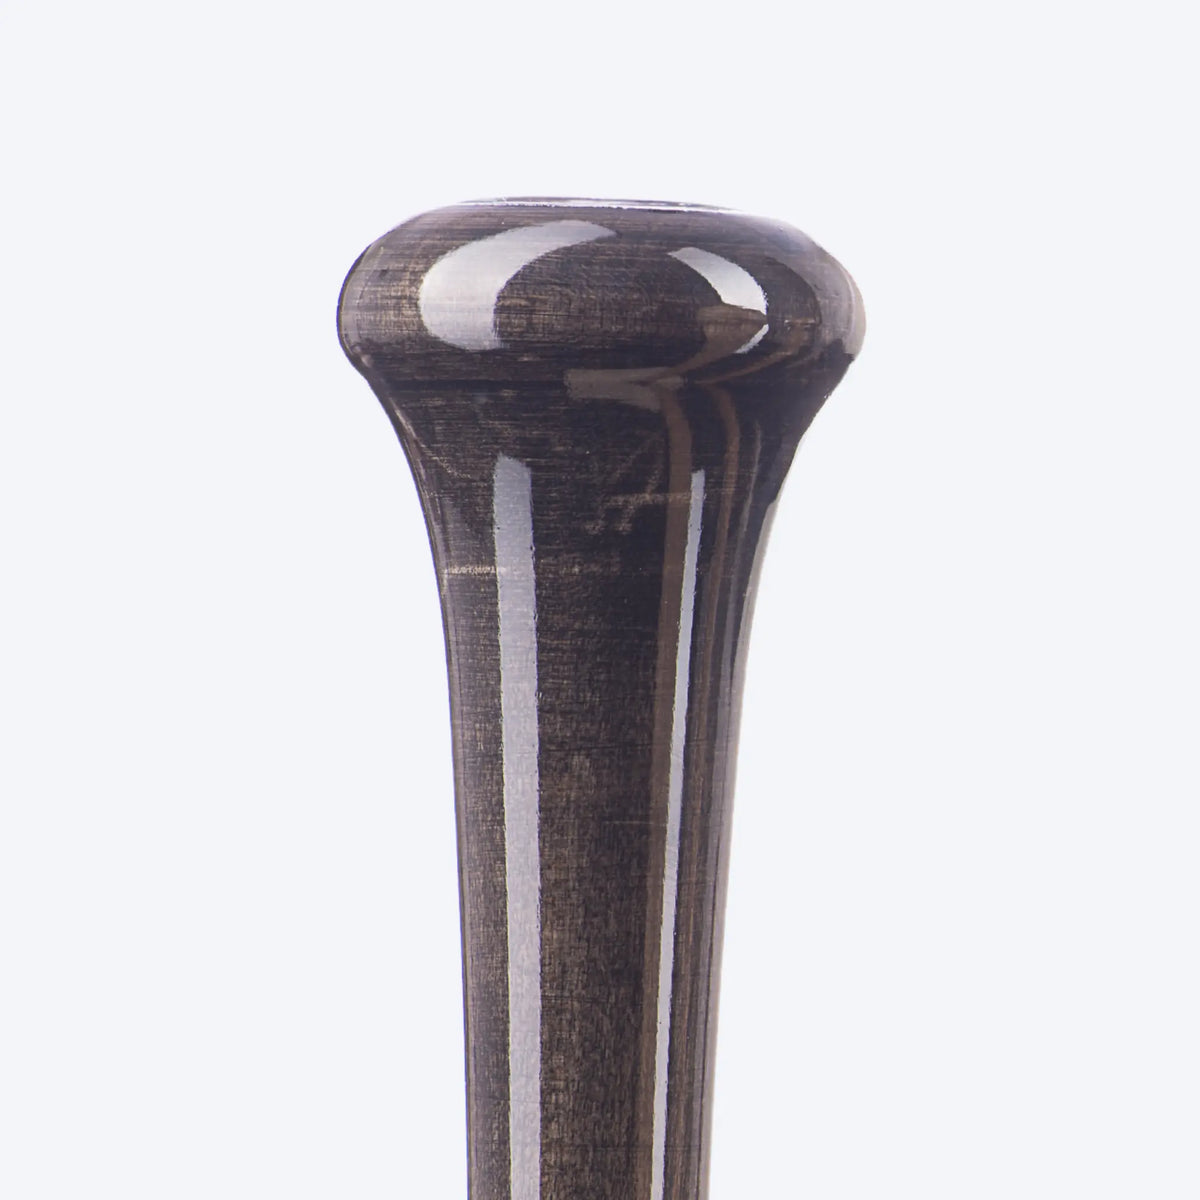 The image provides a detailed view of the top of a flared knob on a Tater wood baseball bat, showcasing the dark stained finish and the fine craftsmanship of the smooth curves and edges, characteristic of a high-quality, professional-grade bat.